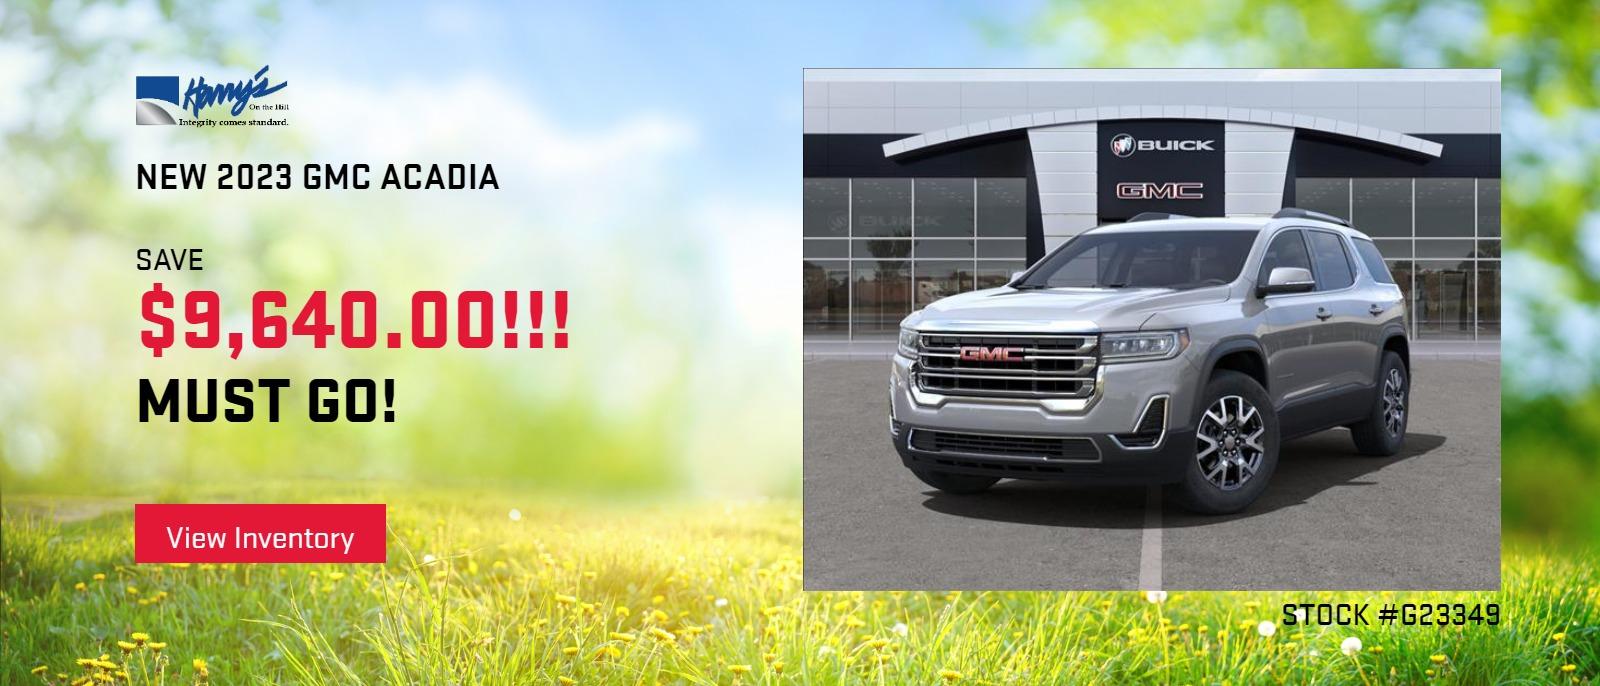 New 2023 GMC Acadia
Save 9640.00!!!
MUST GO!
stock #G23349